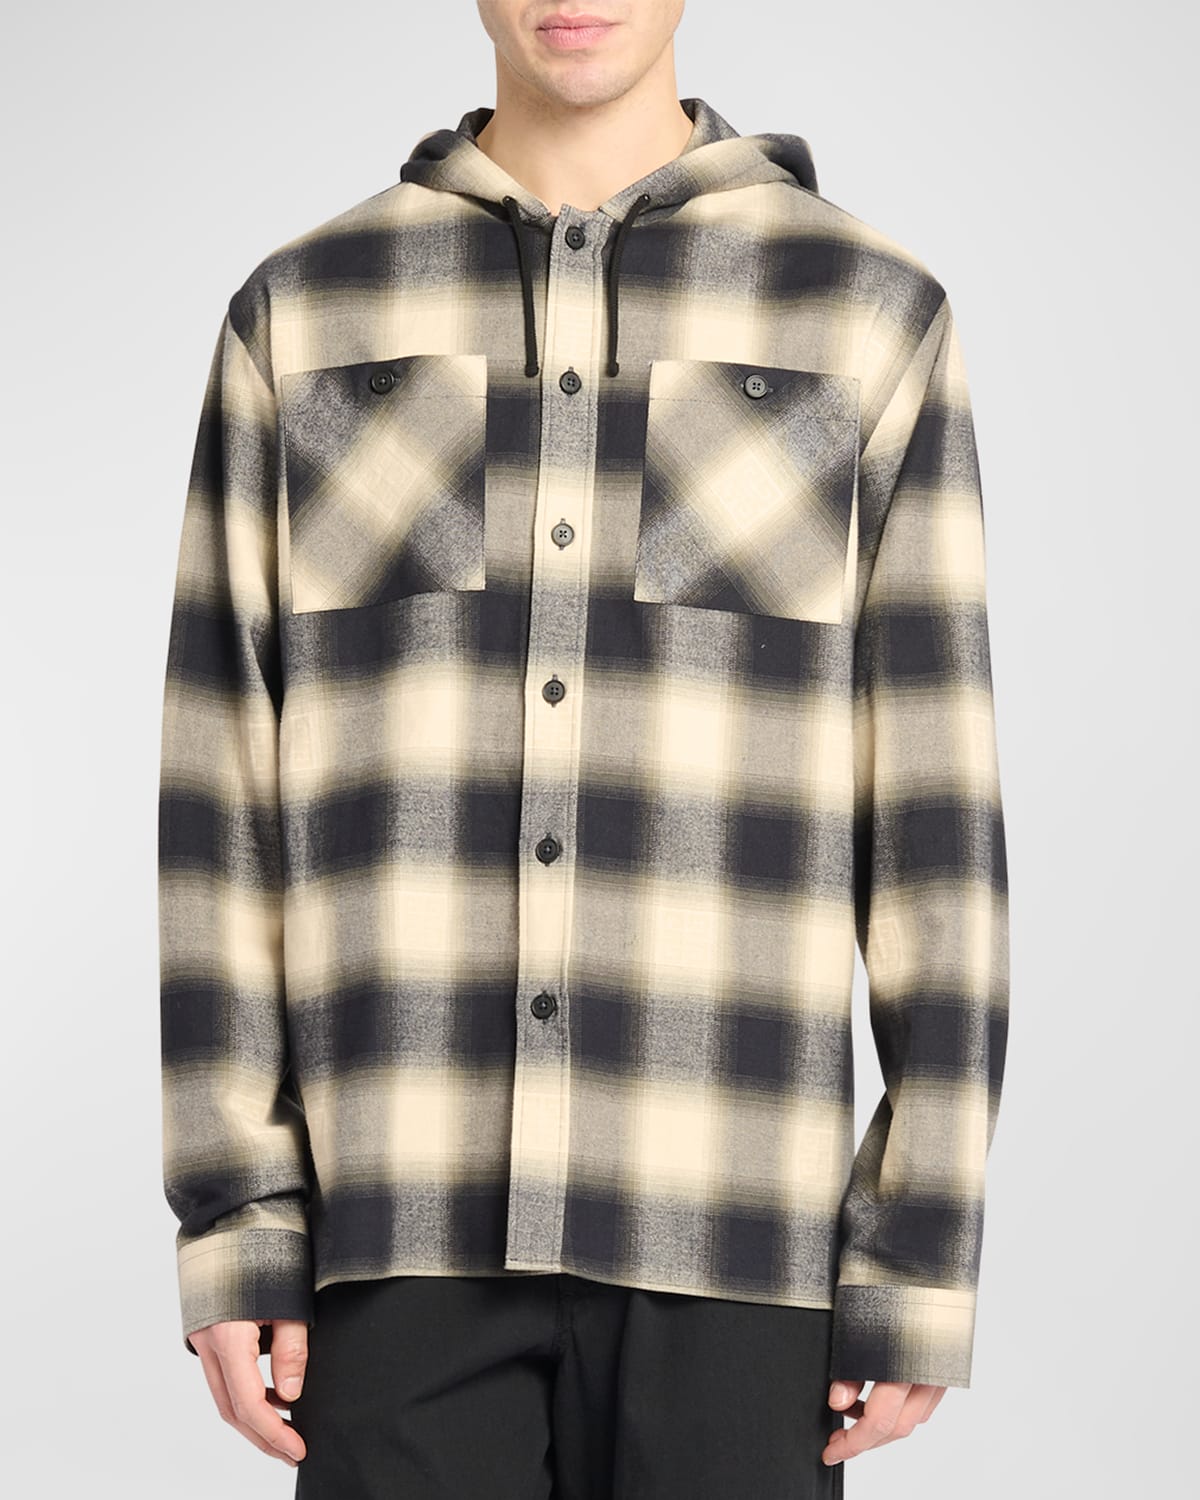 GIVENCHY MEN'S HOODED FLANNEL BUTTON-DOWN SHIRT